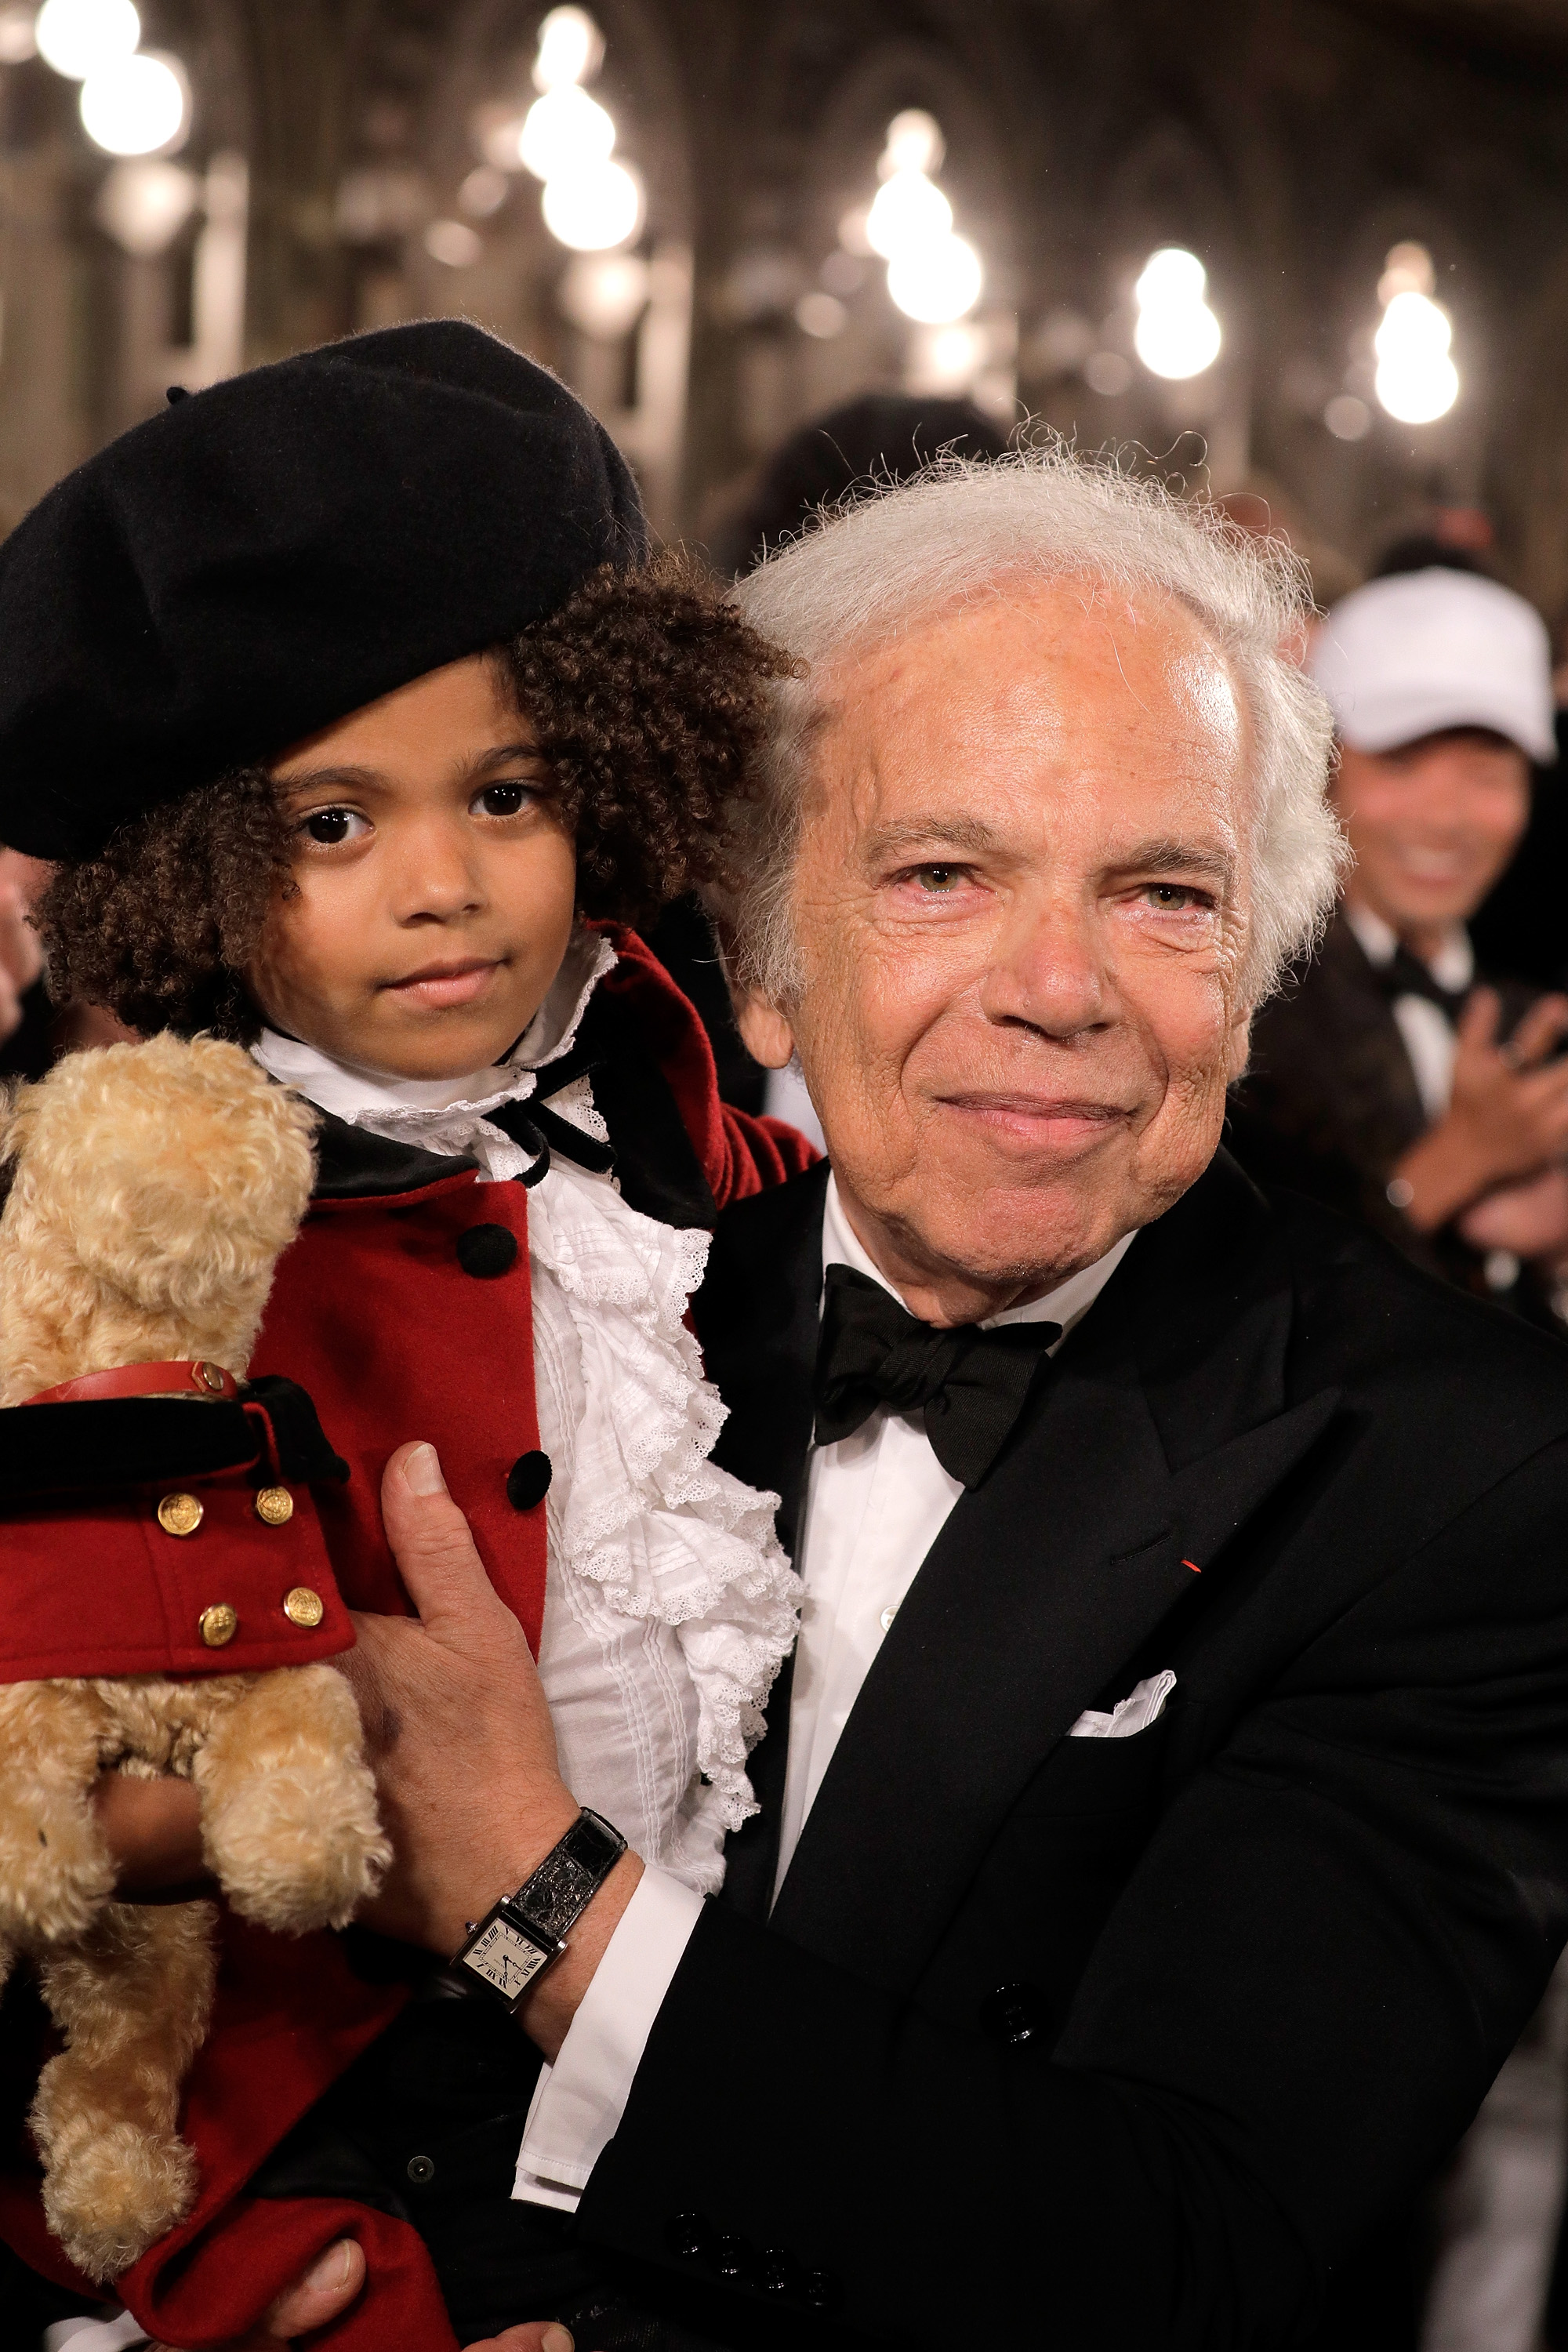 Ralph Lauren's Most Iconic Design Celebrates Its Fifty Year